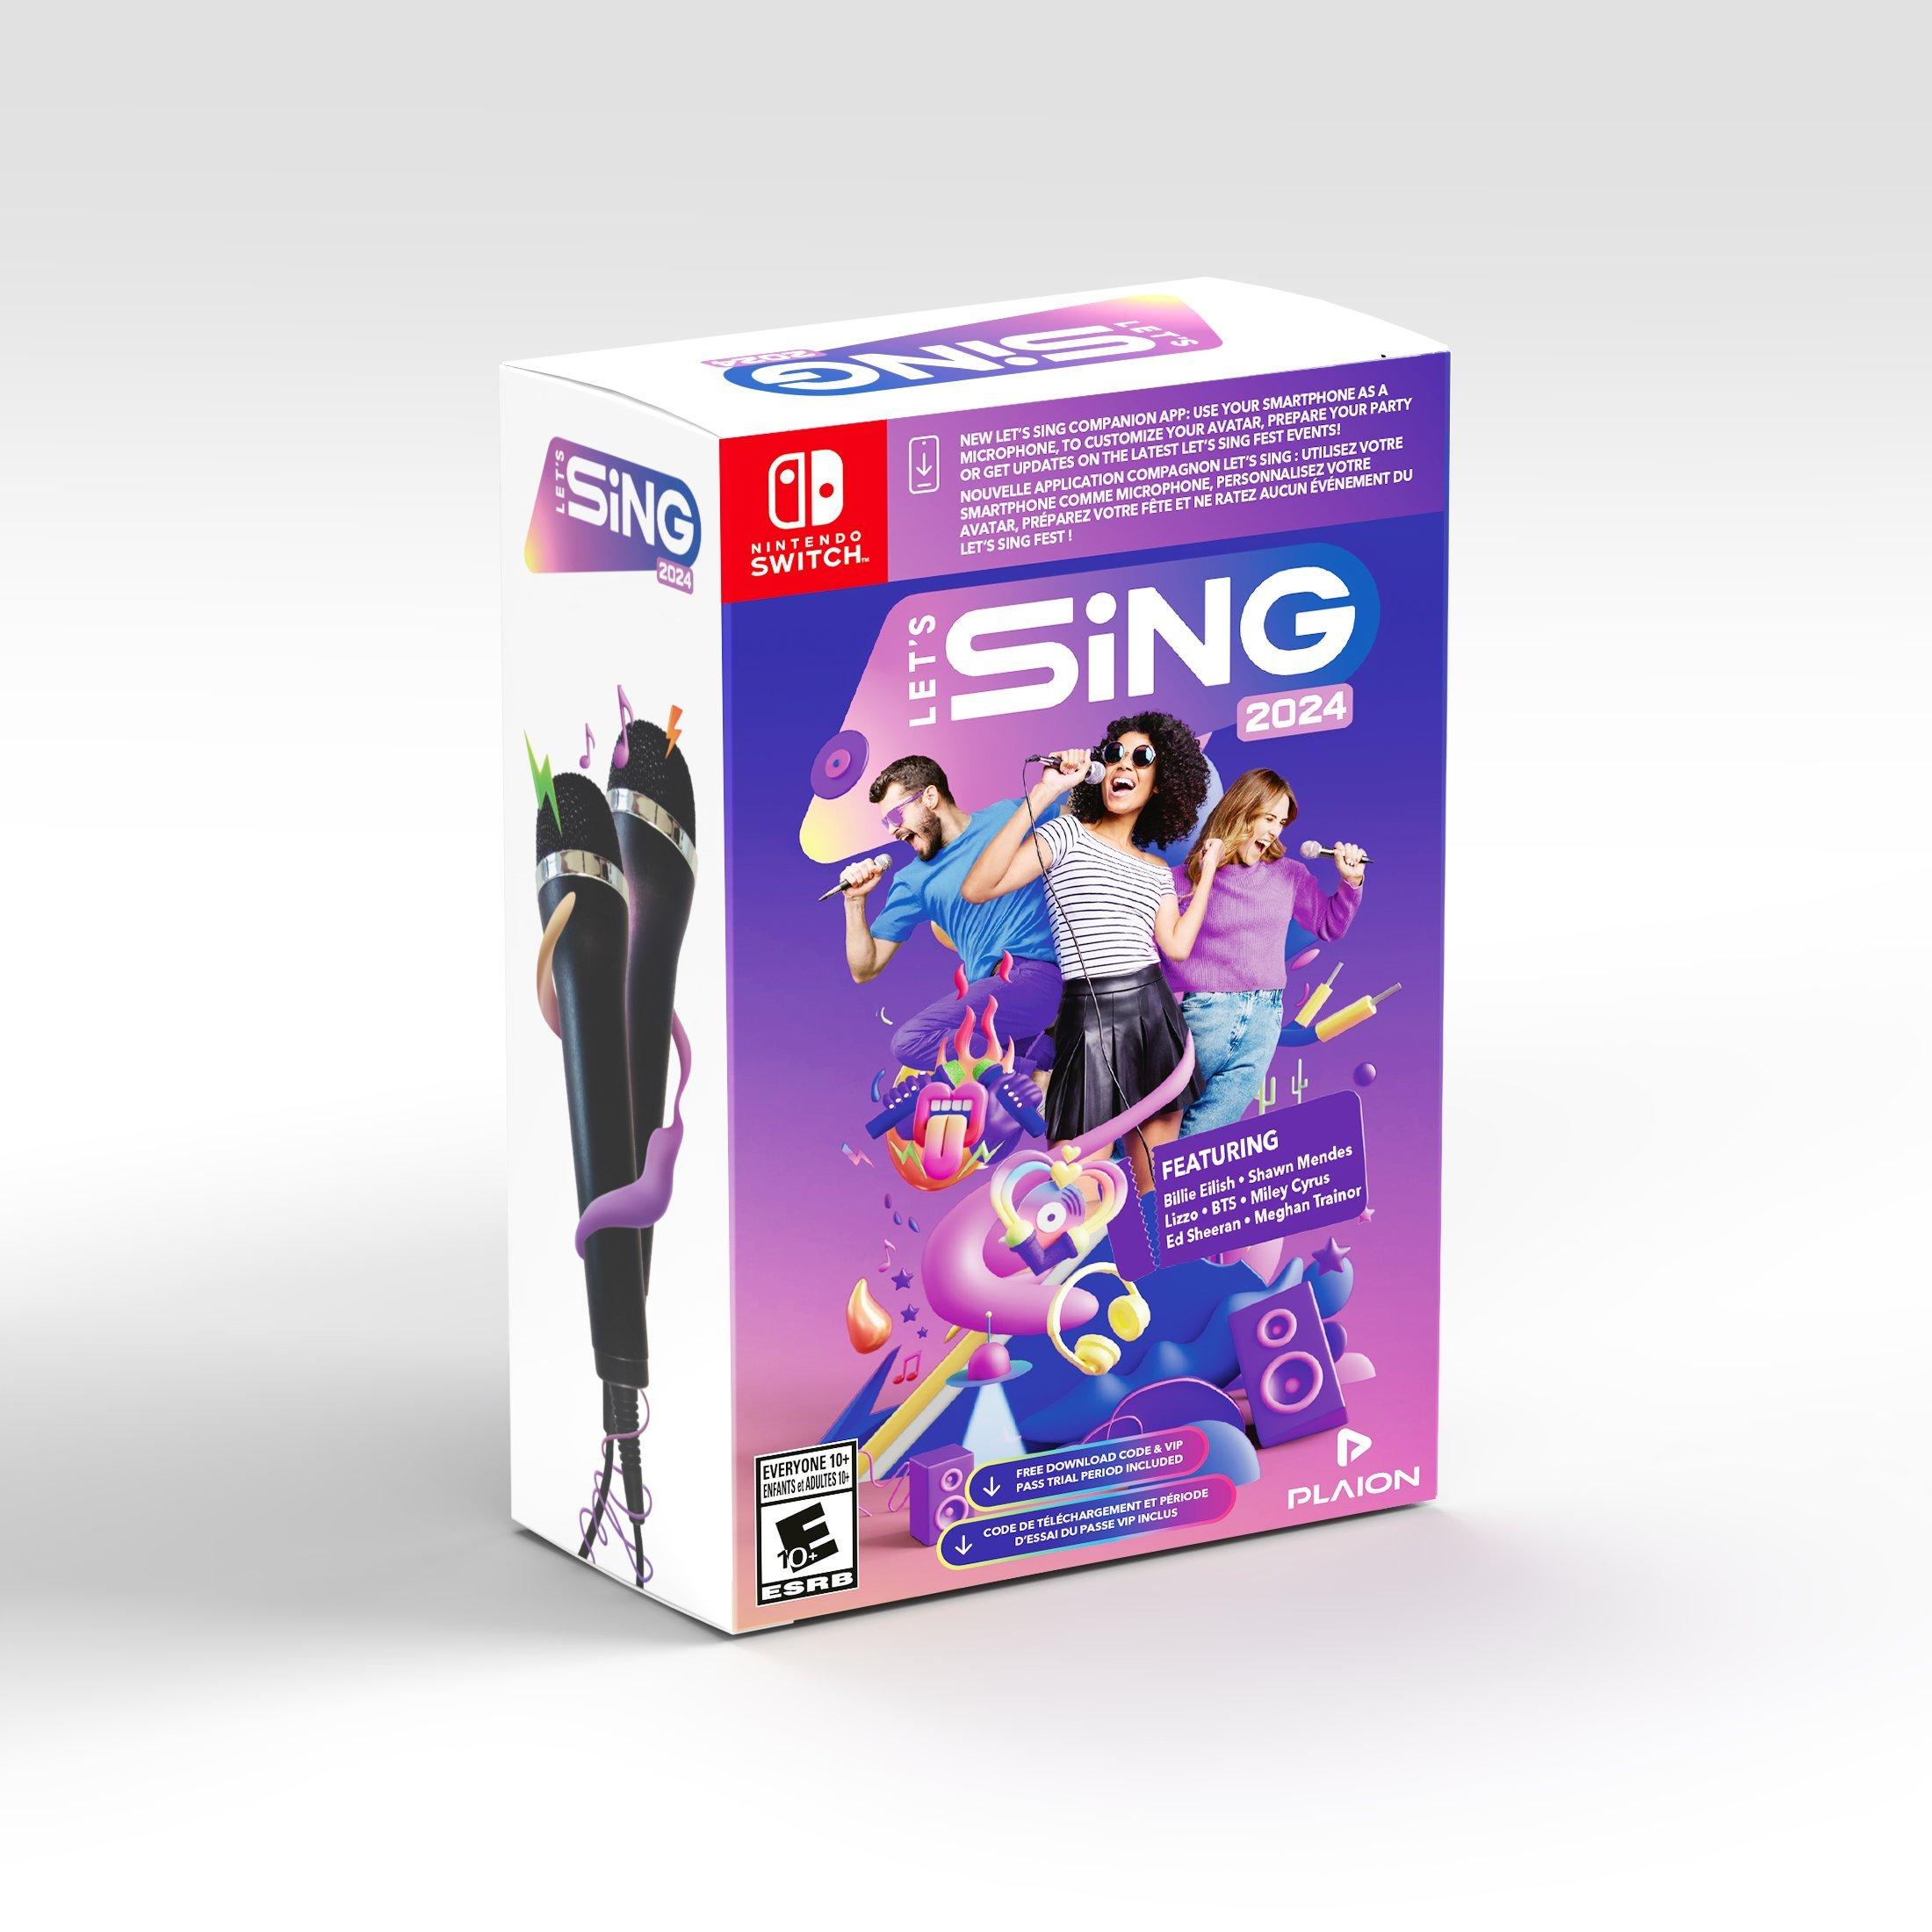 Let's Sing 2024 and 2 Mic - Nintendo Switch, Nintendo Switch